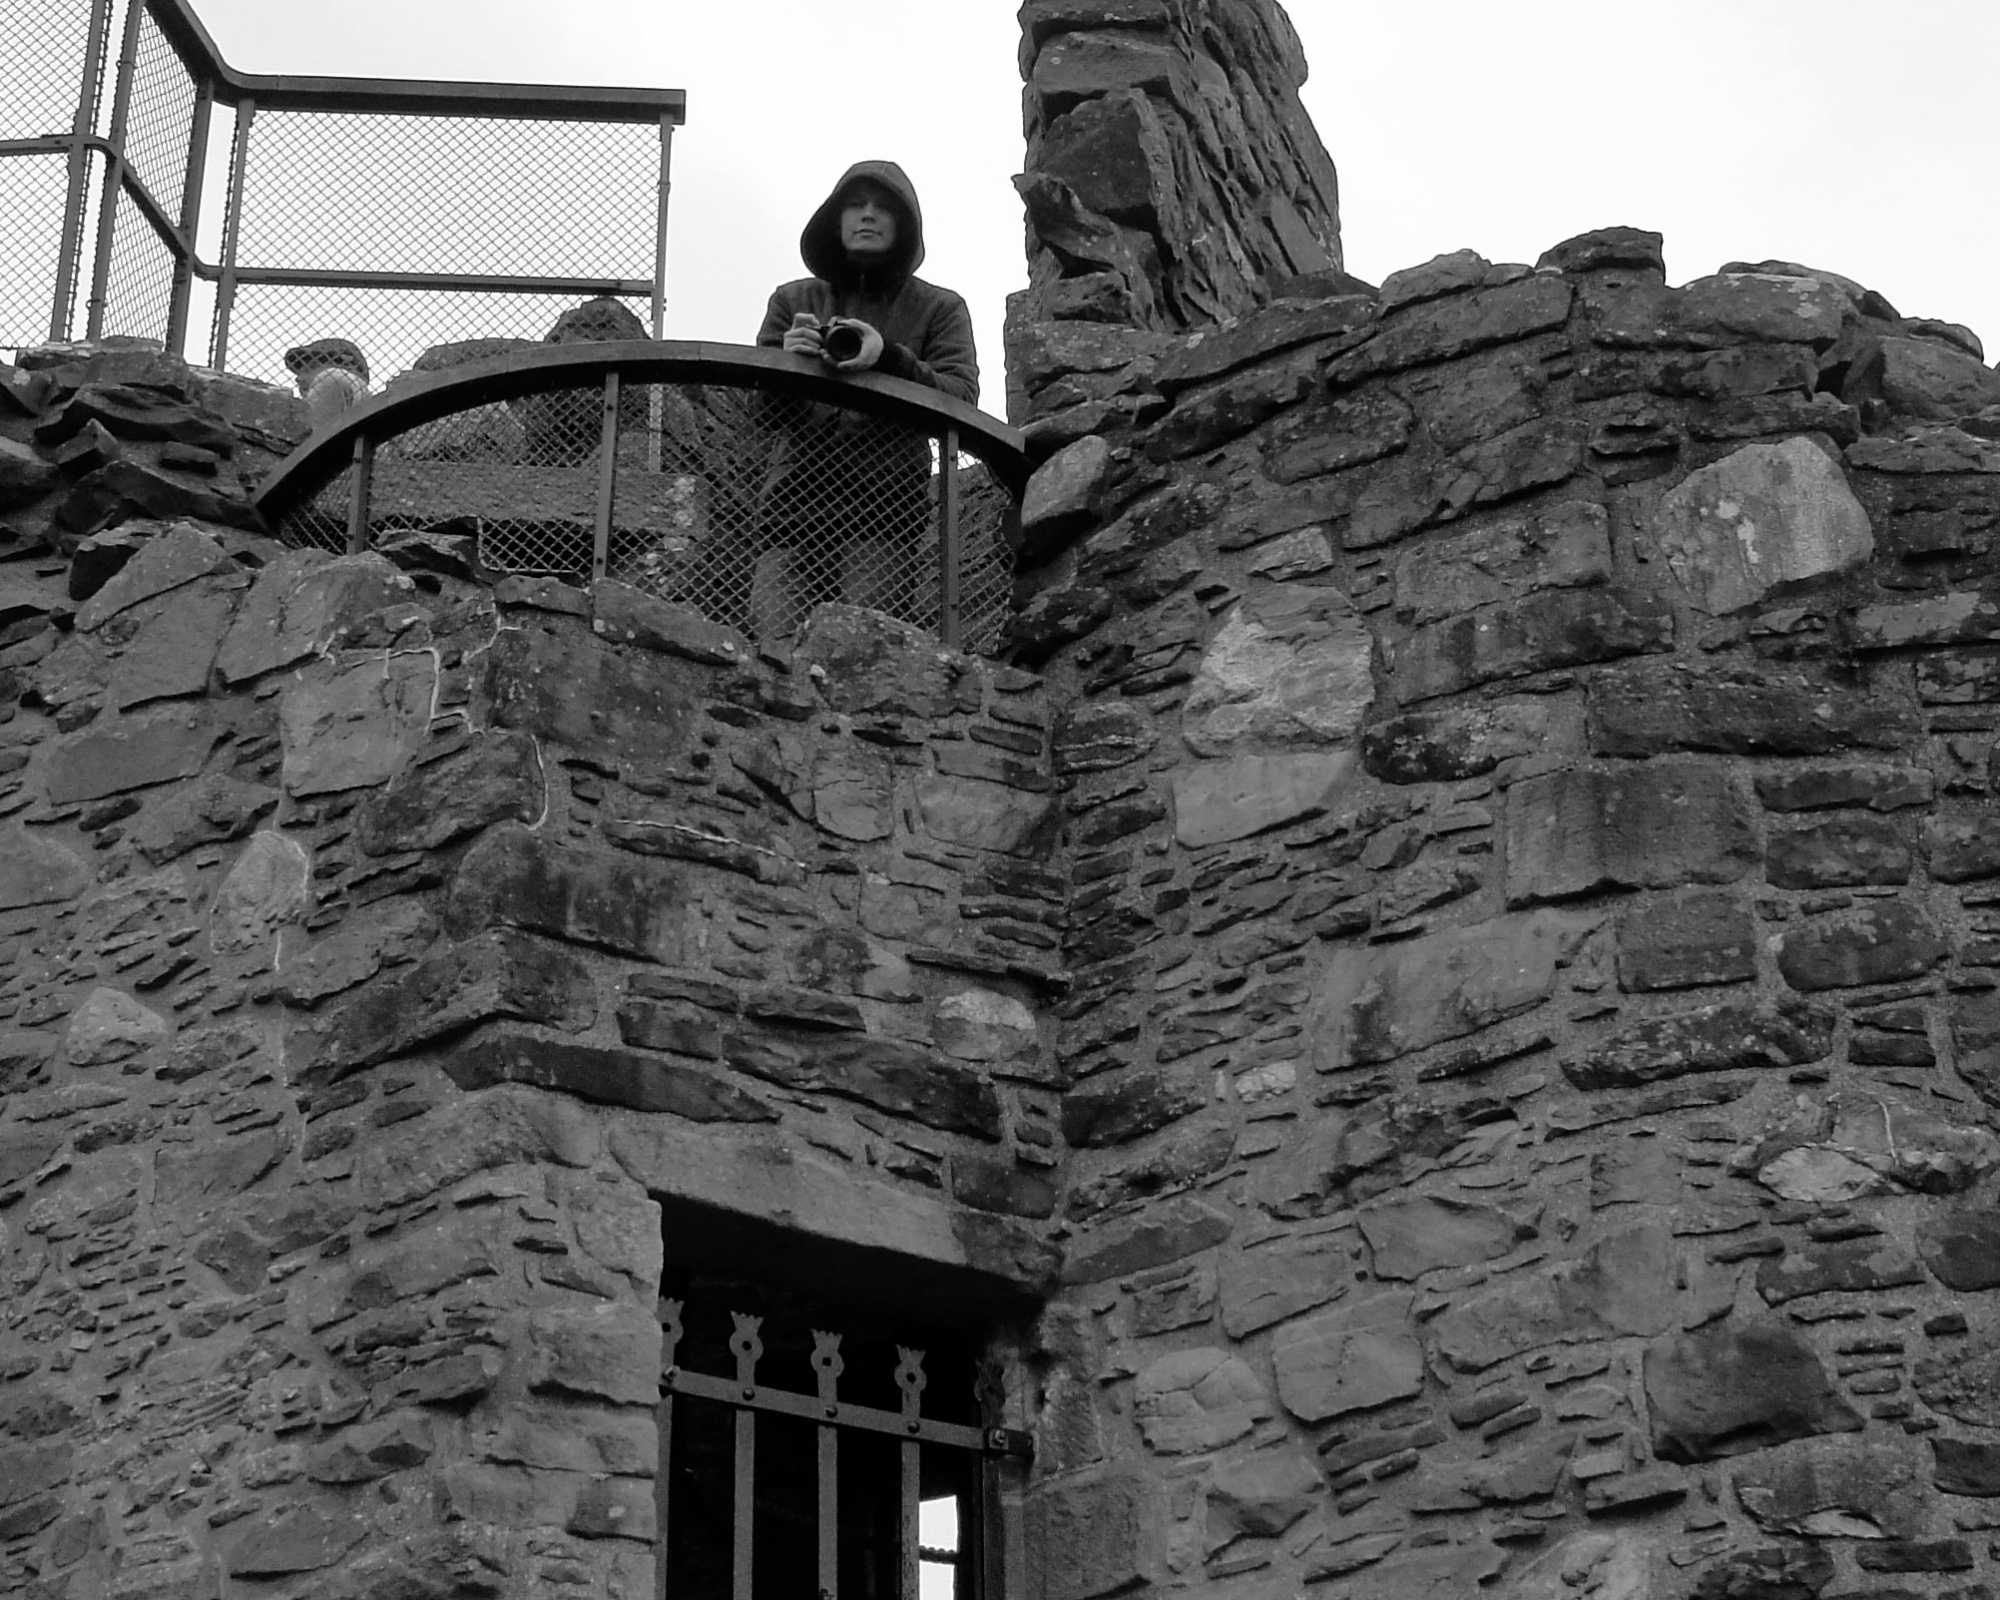 Josh in the Tower at Urquhart Castle